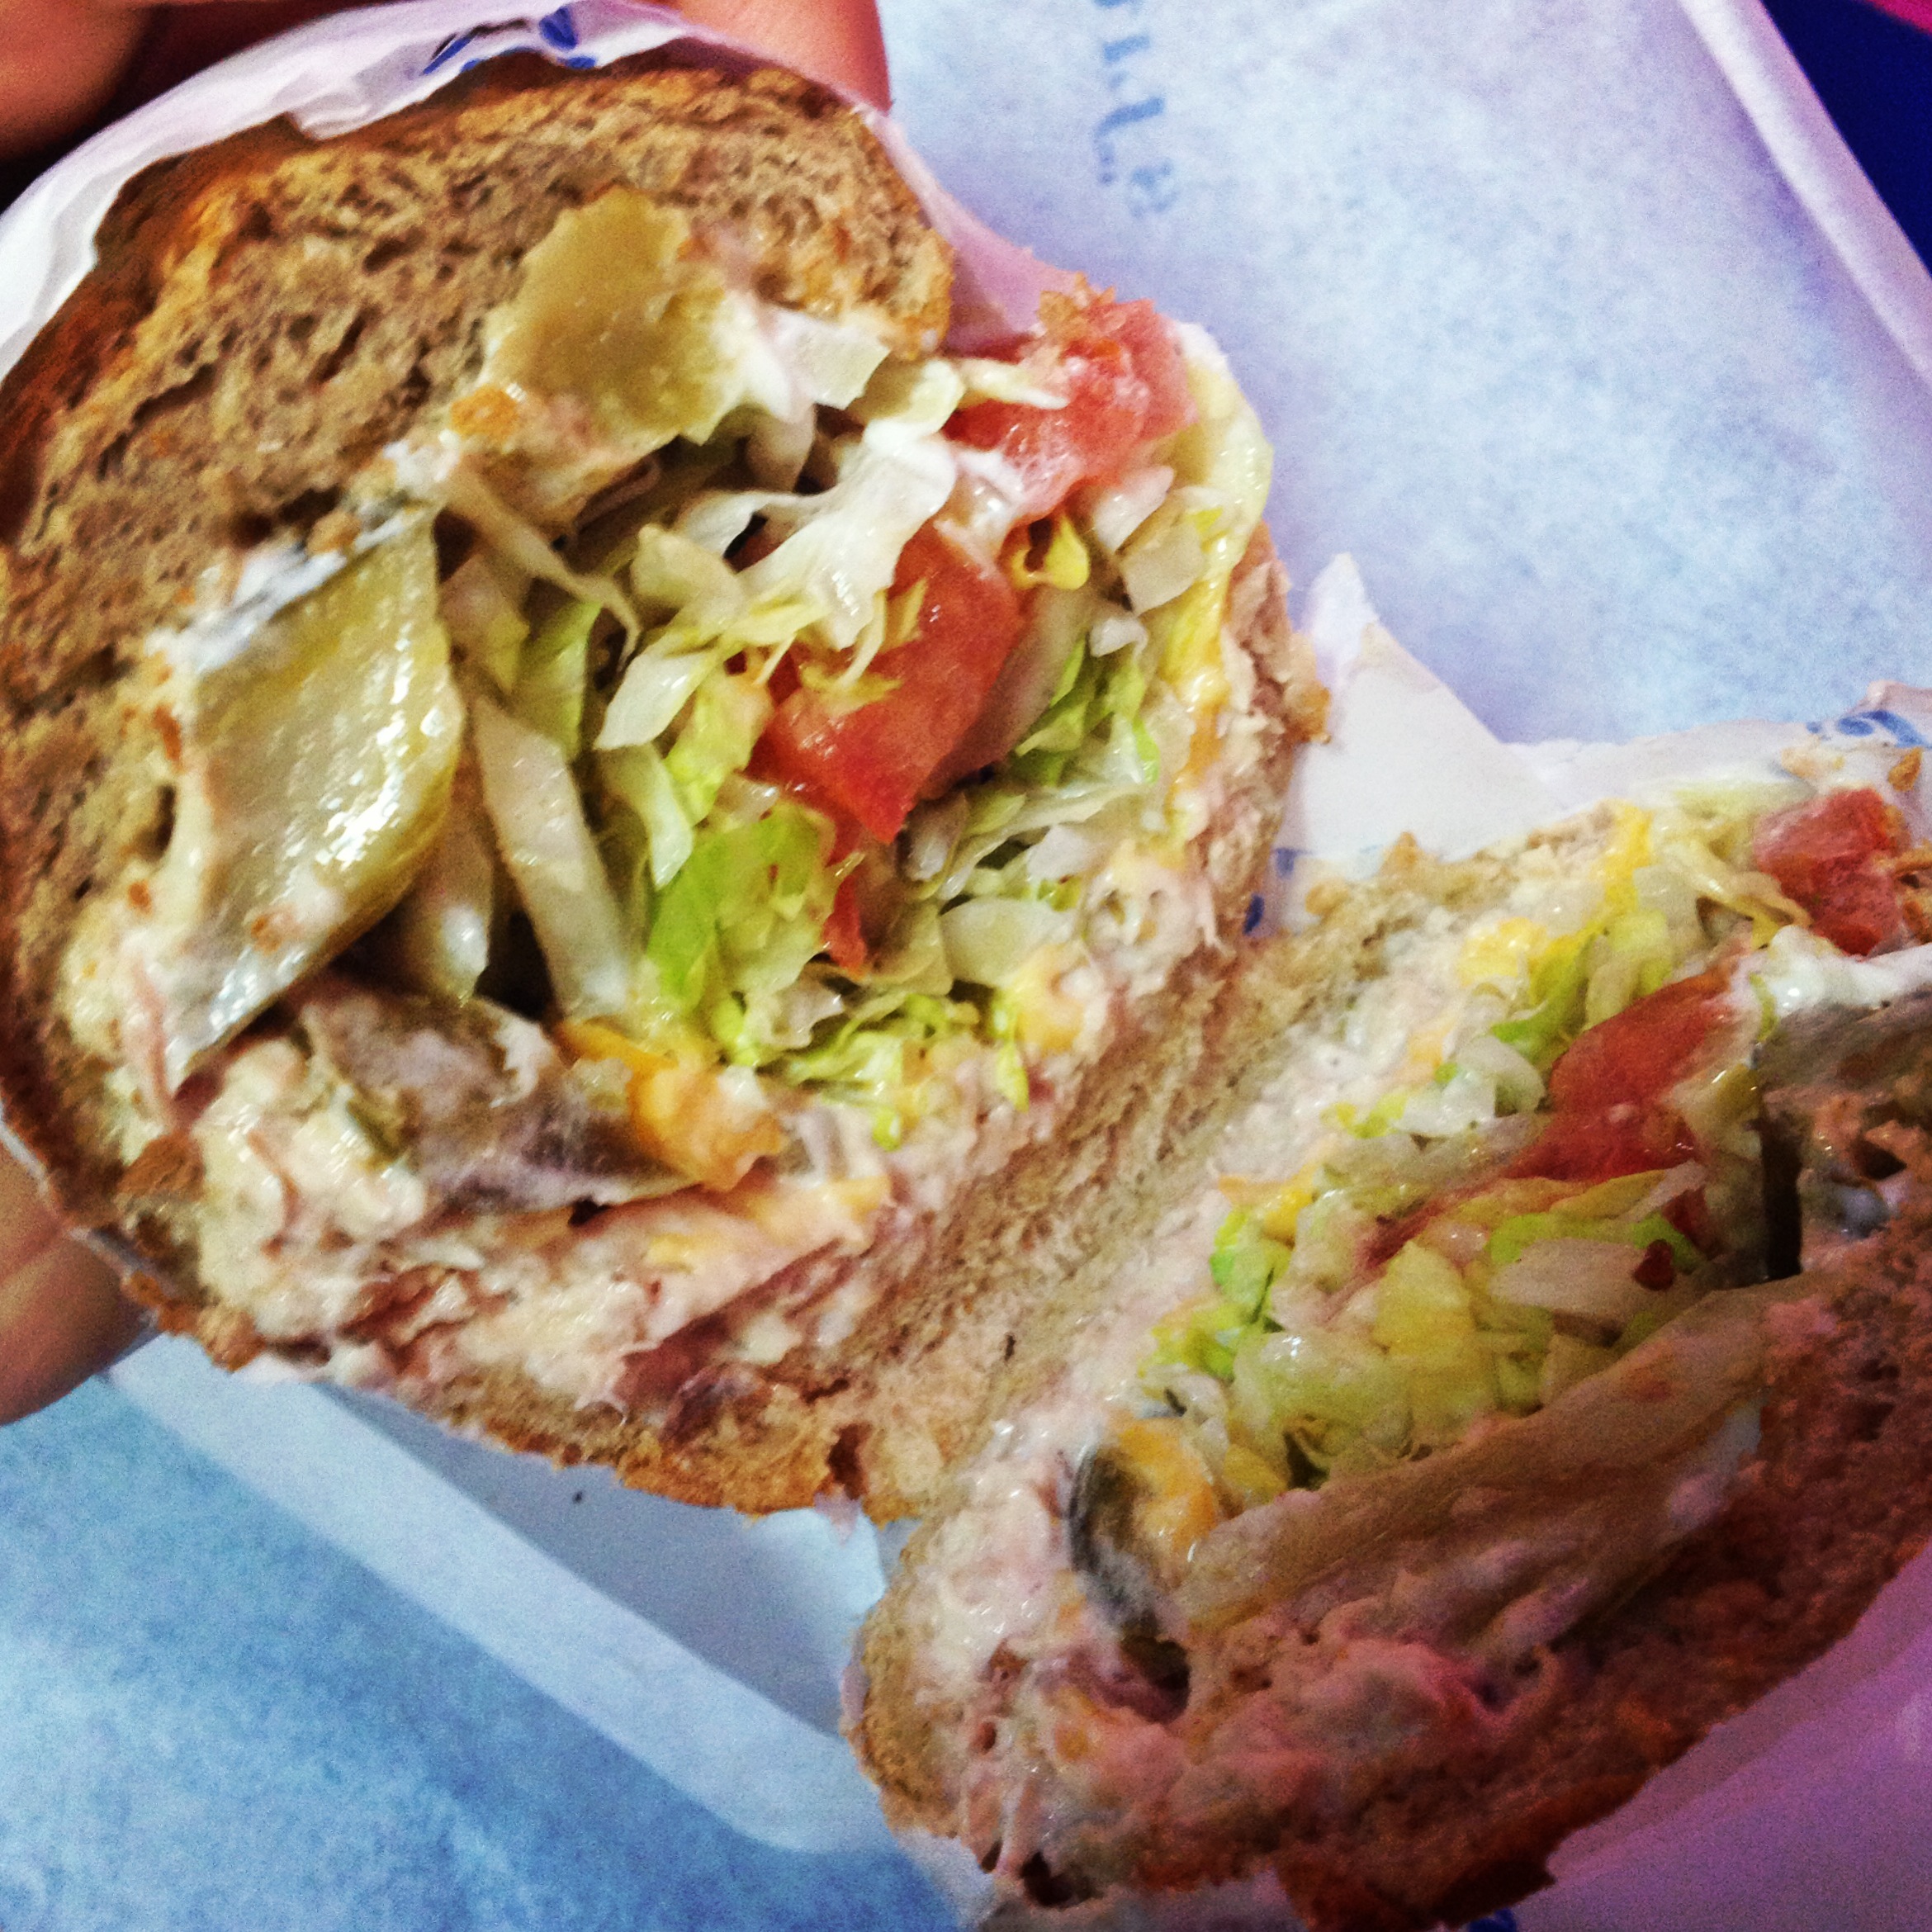 Alana's choice...Tuna Melt with everything from tomatoes to lettuce to hot peppers